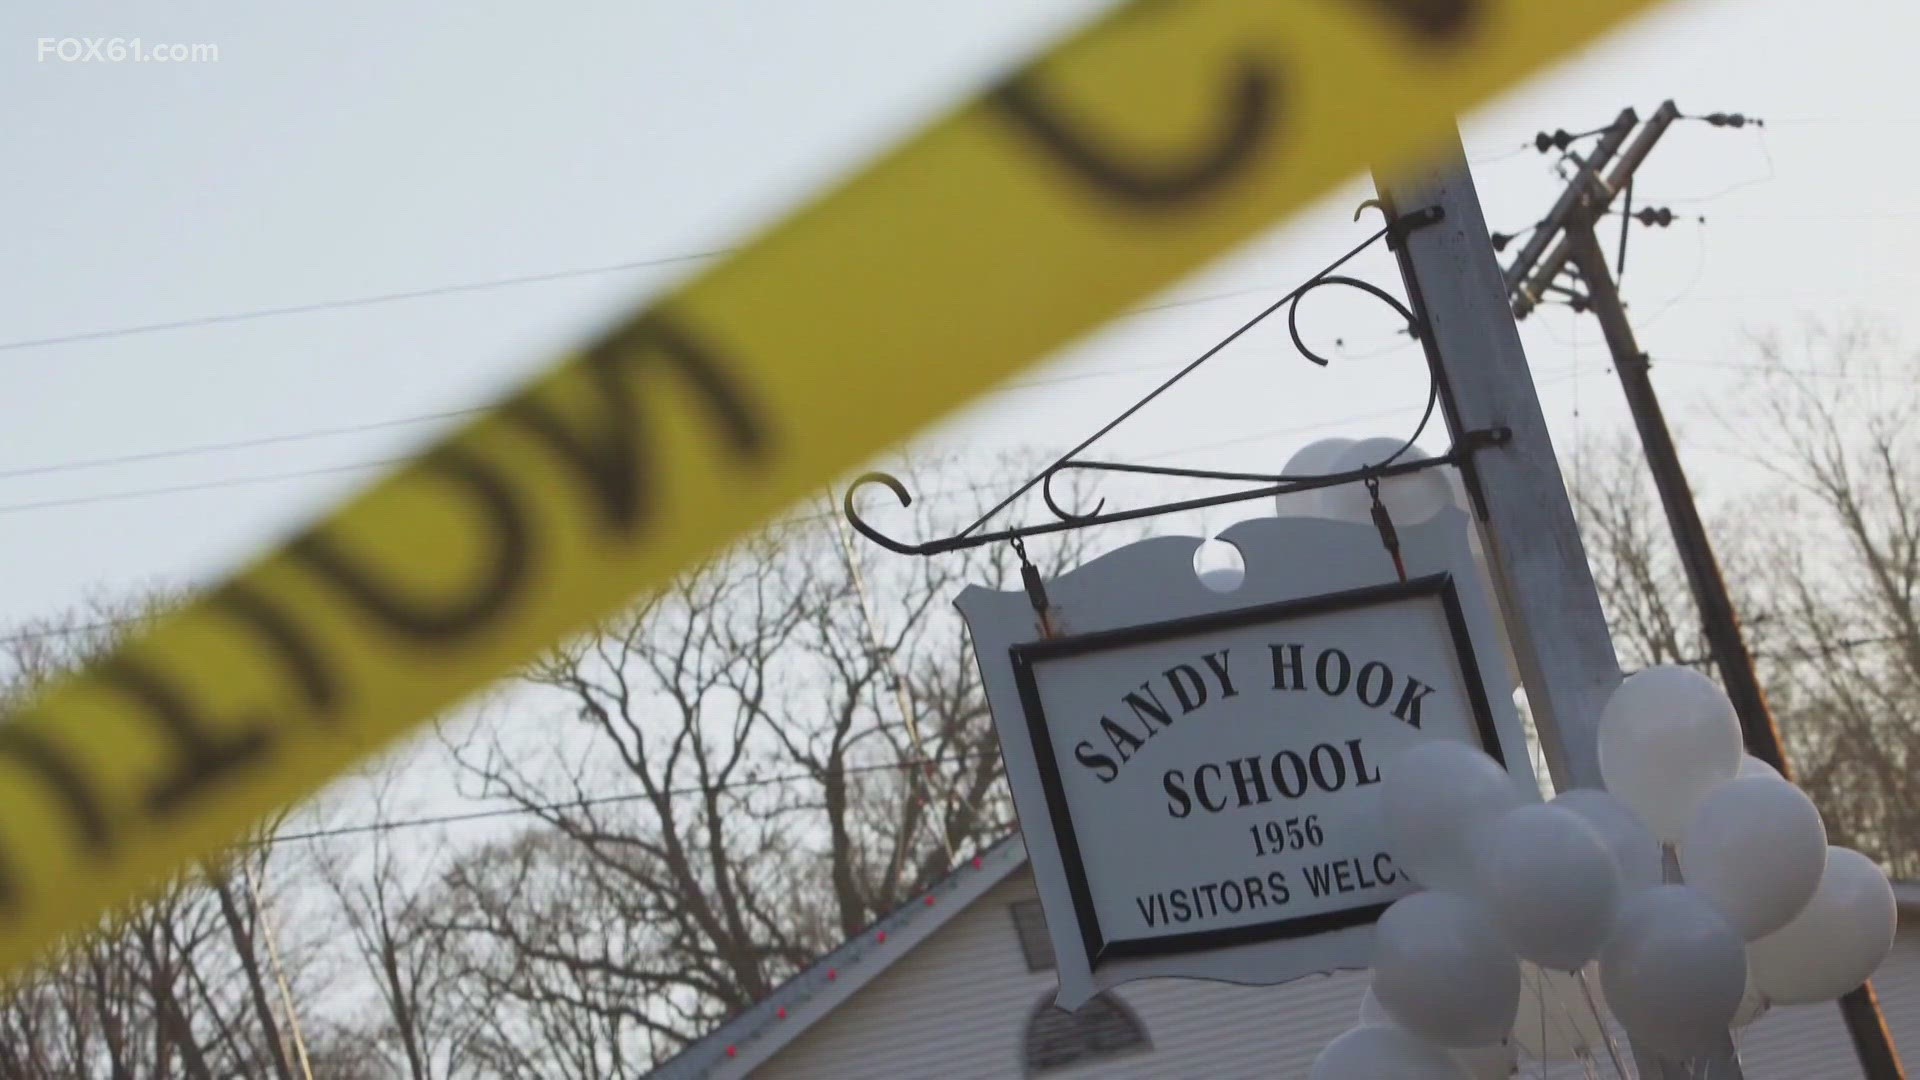 As we mark 11 years since the Sandy Hook tragedy, FOX61's Lindsey Kane takes a look at the gun prevention efforts being made in Connecticut.